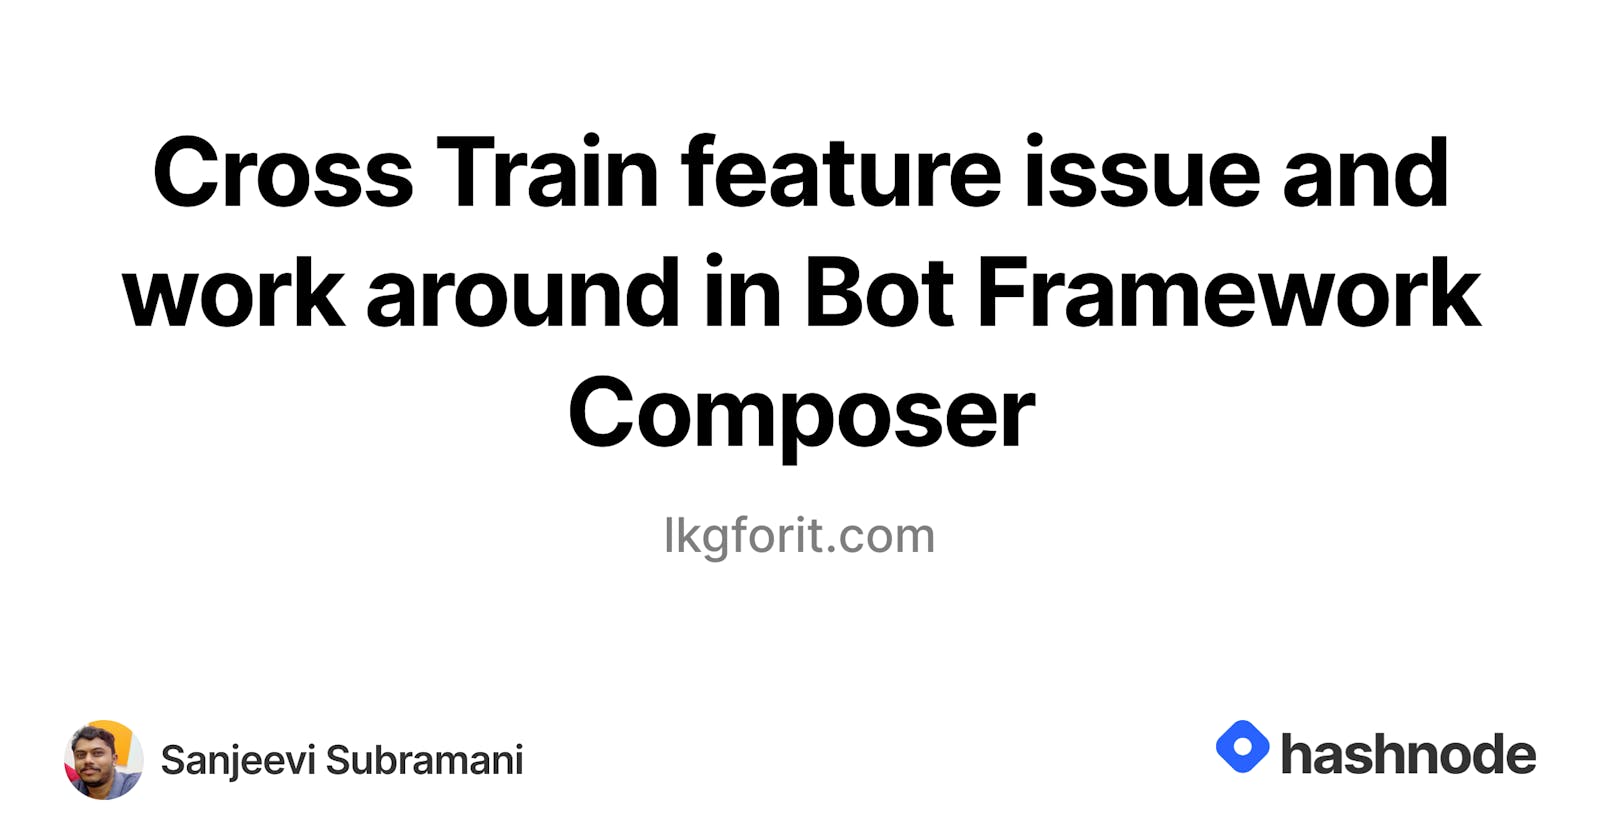 Cross Train feature issue and work around in Bot Framework Composer